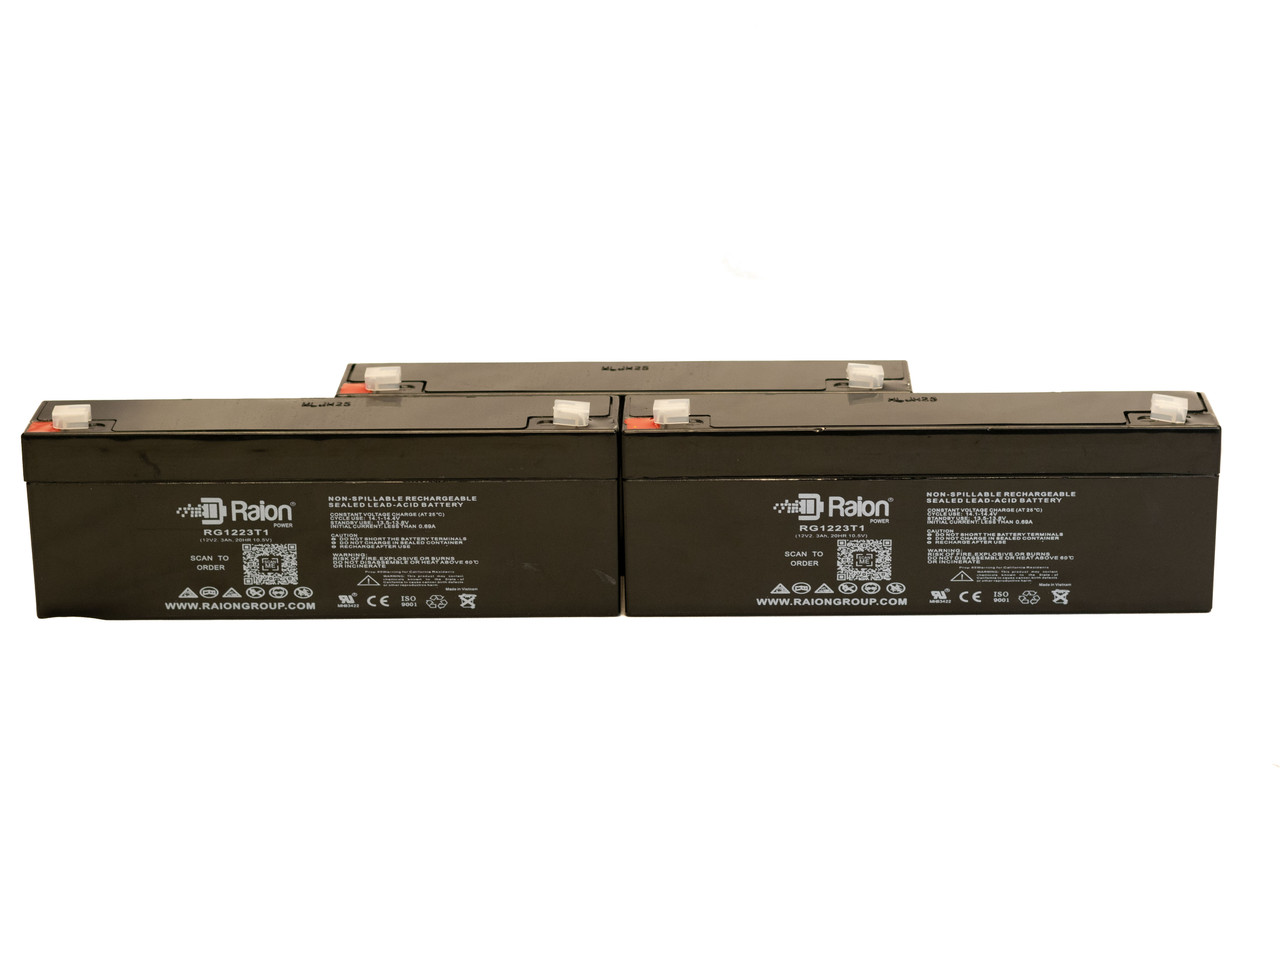 Raion Power 12V 2.3Ah RG1223T1 Replacement Medical Battery for Aspen Labs ATS 1000 - 3 Pack